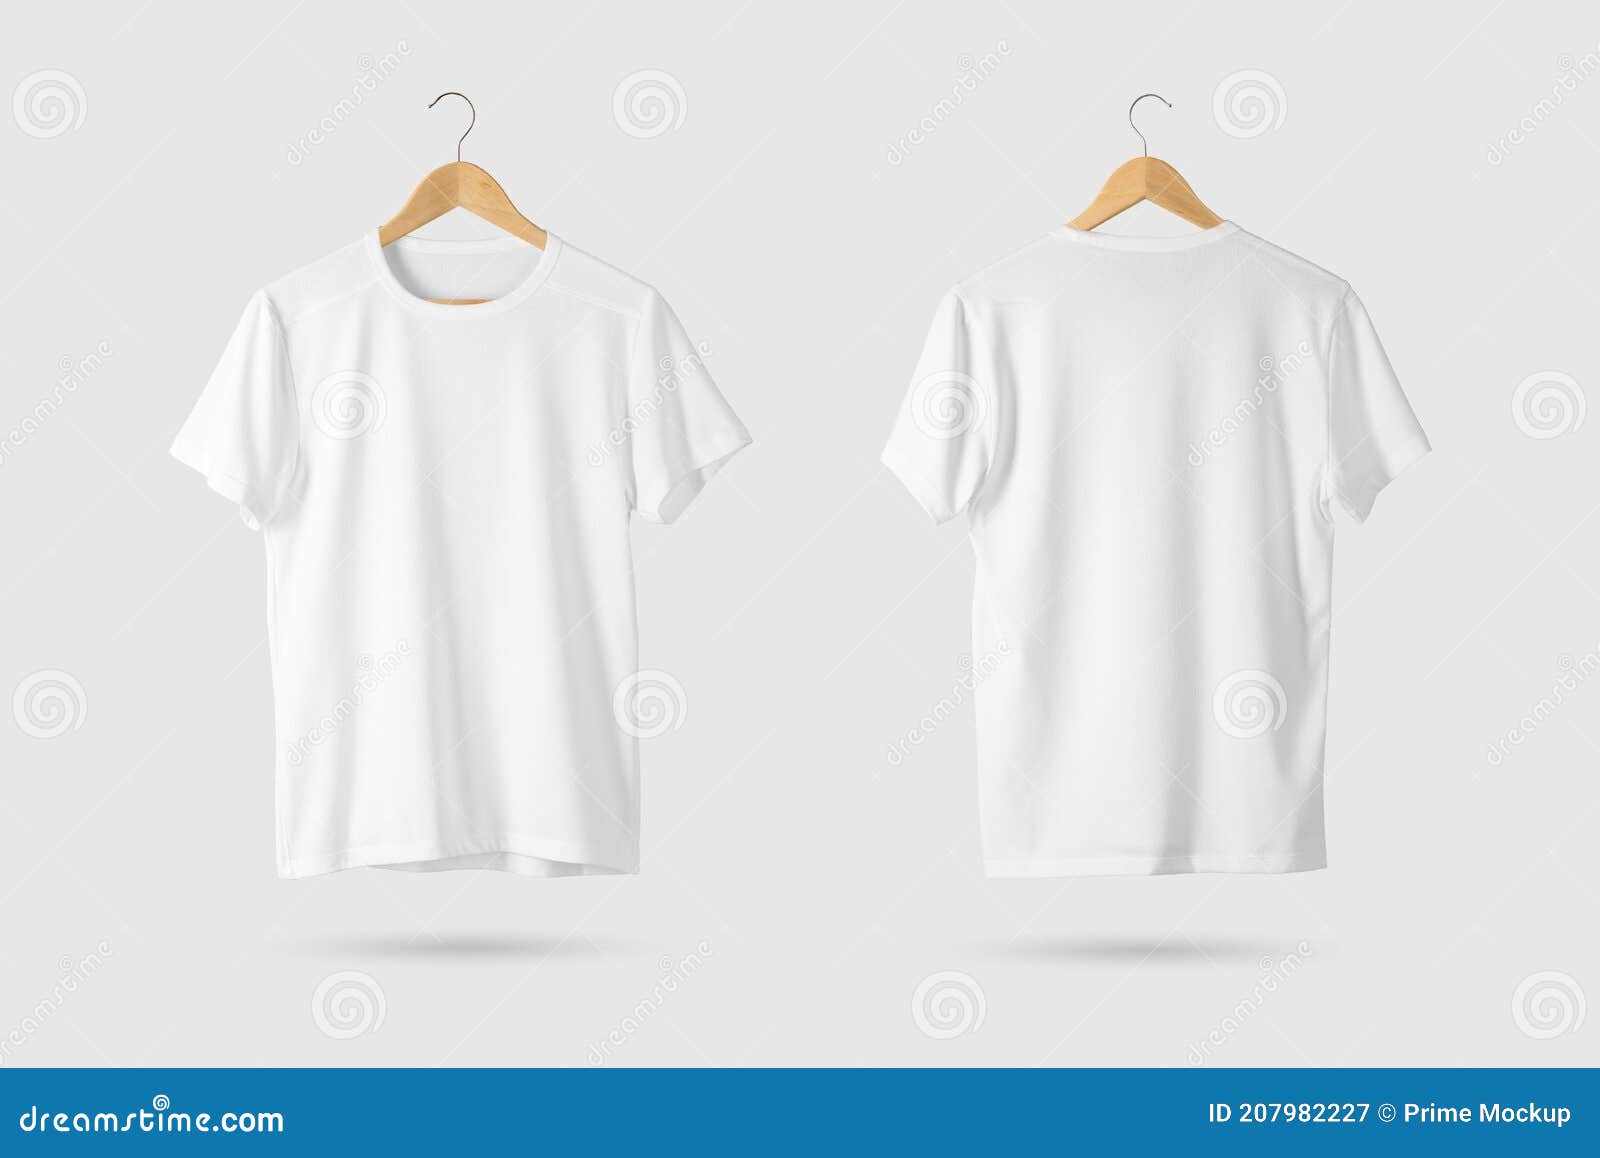 Blank White T Shirt Mockup on Wooden Isolated on Grey Background Front and Rear Side View. Stock Image - of background, copybook: 207982227